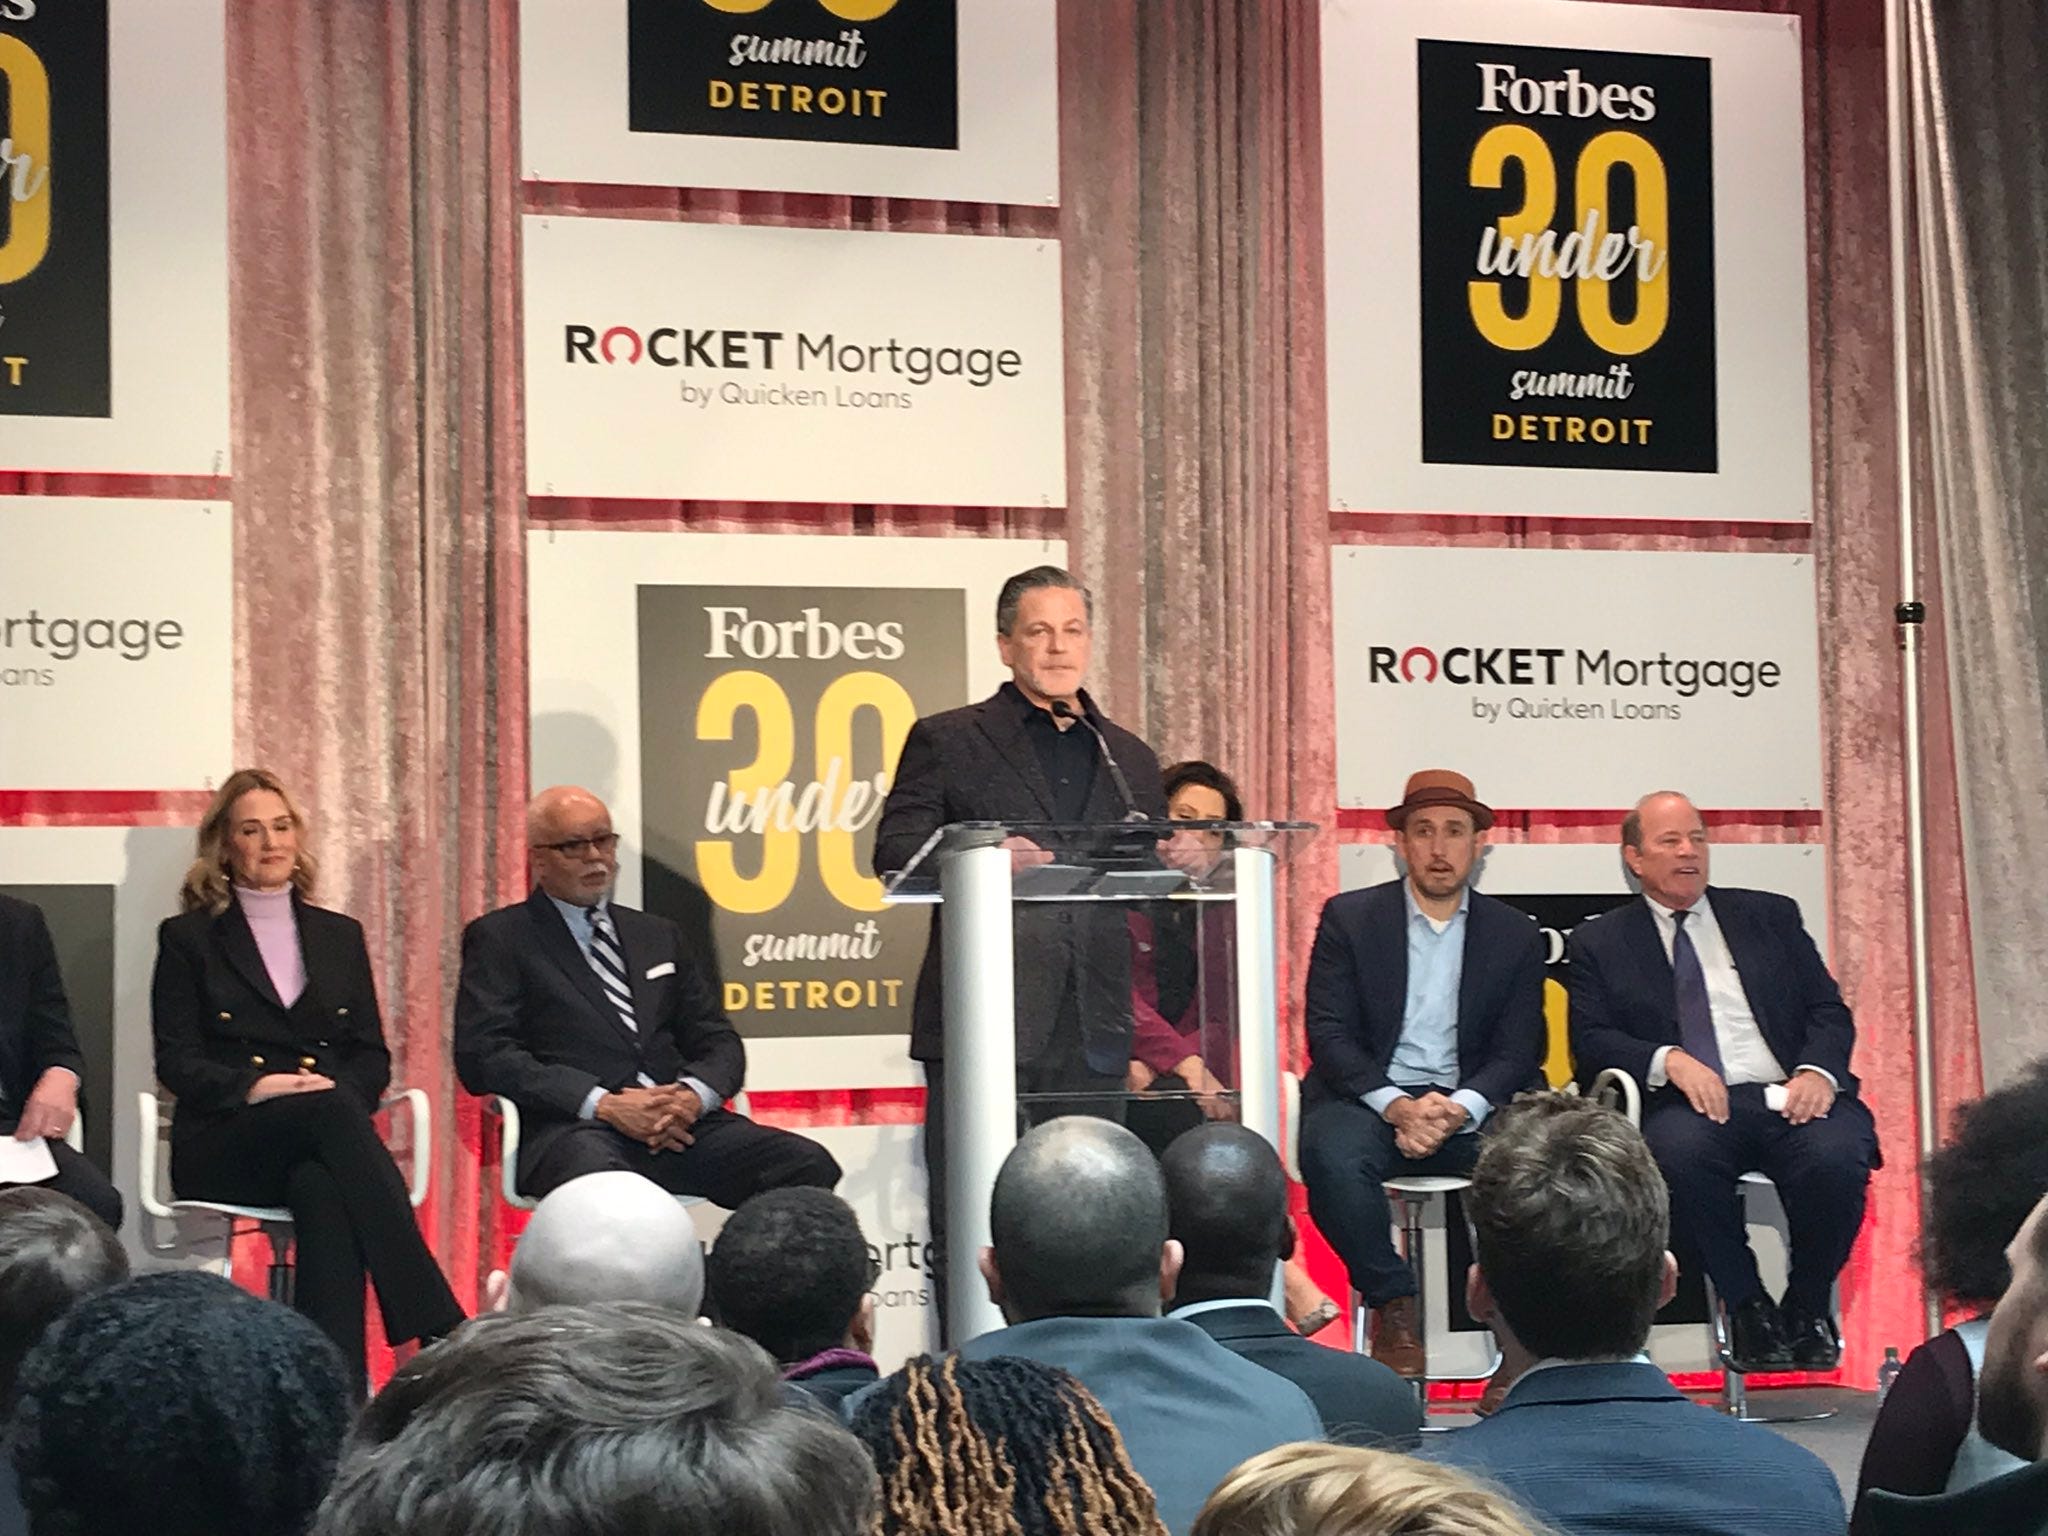 Dan Gilbert, founder and chairman of Quicken Loans, said the Forbes Under 30 summit is a three-year commitment. It will take place in October 2019, 2020 and 2021.